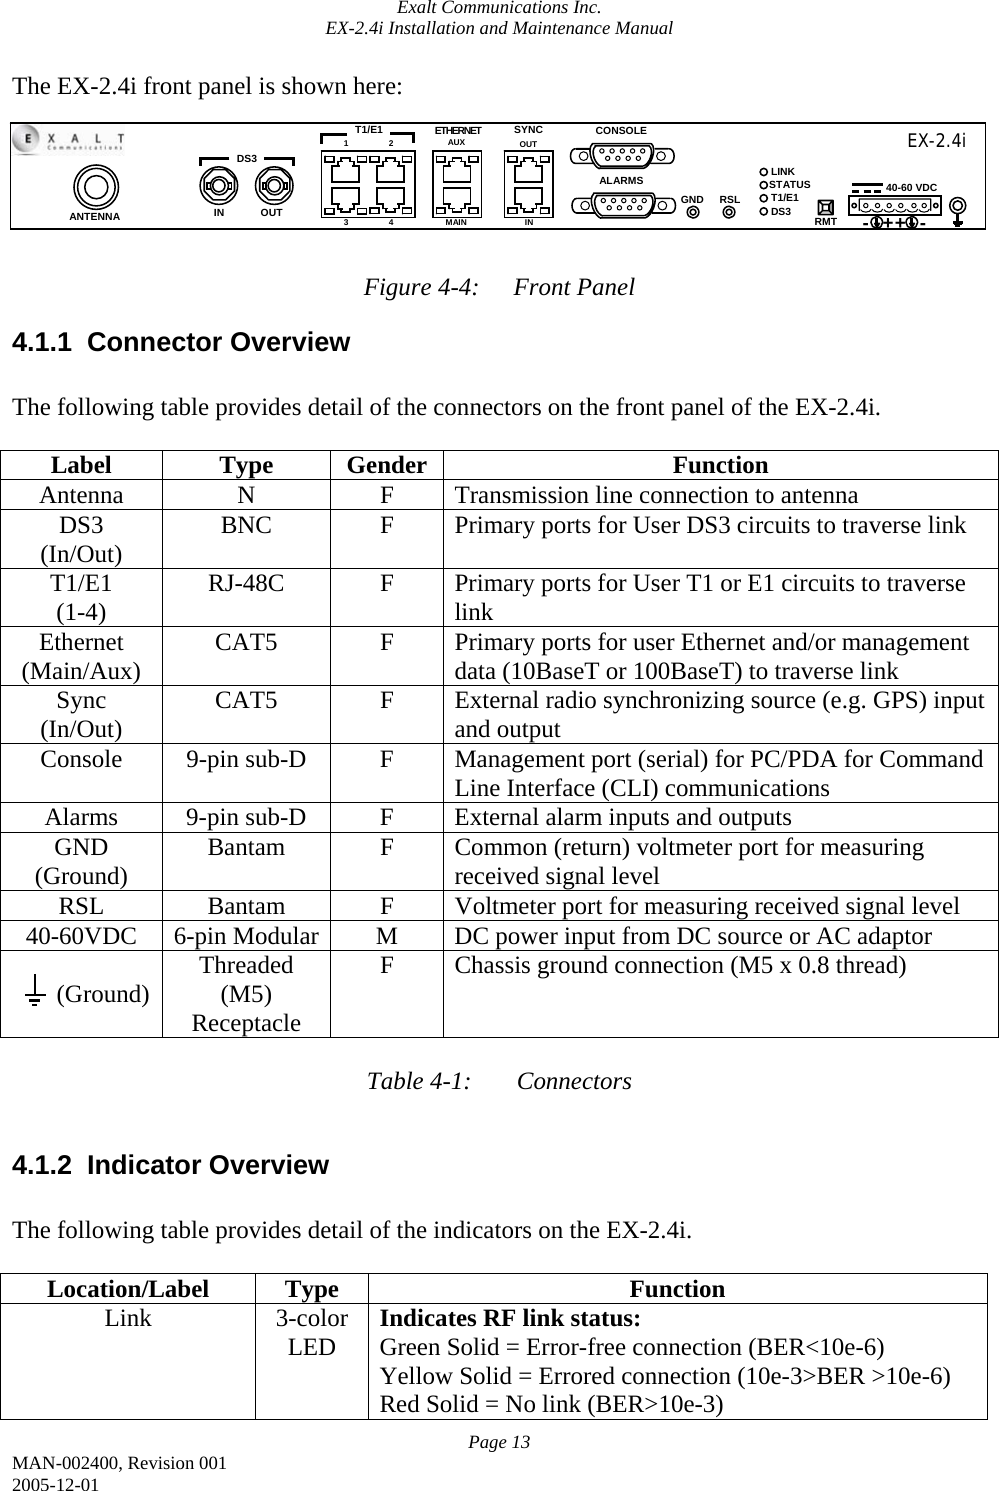 Exalt Communications Inc. EX-2.4i Installation and Maintenance Manual Page 13 MAN-002400, Revision 001 2005-12-01 The EX-2.4i front panel is shown here:        Figure 4-4:  Front Panel 4.1.1 Connector Overview  The following table provides detail of the connectors on the front panel of the EX-2.4i.  Label Type Gender  Function Antenna  N  F  Transmission line connection to antenna DS3 (In/Out)  BNC  F  Primary ports for User DS3 circuits to traverse link T1/E1 (1-4)  RJ-48C  F  Primary ports for User T1 or E1 circuits to traverse link Ethernet (Main/Aux)  CAT5  F  Primary ports for user Ethernet and/or management data (10BaseT or 100BaseT) to traverse link Sync (In/Out)  CAT5  F  External radio synchronizing source (e.g. GPS) input and output Console  9-pin sub-D  F  Management port (serial) for PC/PDA for Command Line Interface (CLI) communications Alarms 9-pin sub-D  F External alarm inputs and outputs GND (Ground)  Bantam  F  Common (return) voltmeter port for measuring received signal level RSL  Bantam  F  Voltmeter port for measuring received signal level 40-60VDC  6-pin Modular  M  DC power input from DC source or AC adaptor         (Ground)  Threaded (M5) Receptacle F  Chassis ground connection (M5 x 0.8 thread)   Table 4-1:  Connectors  4.1.2 Indicator Overview  The following table provides detail of the indicators on the EX-2.4i.  Location/Label Type  Function Link 3-color LED  Indicates RF link status: Green Solid = Error-free connection (BER&lt;10e-6) Yellow Solid = Errored connection (10e-3&gt;BER &gt;10e-6) Red Solid = No link (BER&gt;10e-3)   EX-2.4i   ANTENNA    DS3 OUT IN  RSL CONSOLE ETHERNET AUX T1/E1  SYNC MAIN     IN 1 2 3    OUT 4 ALARMS GND LINK STATUS T1/E1 DS3  RMT  - ++ -40-60 VDC 